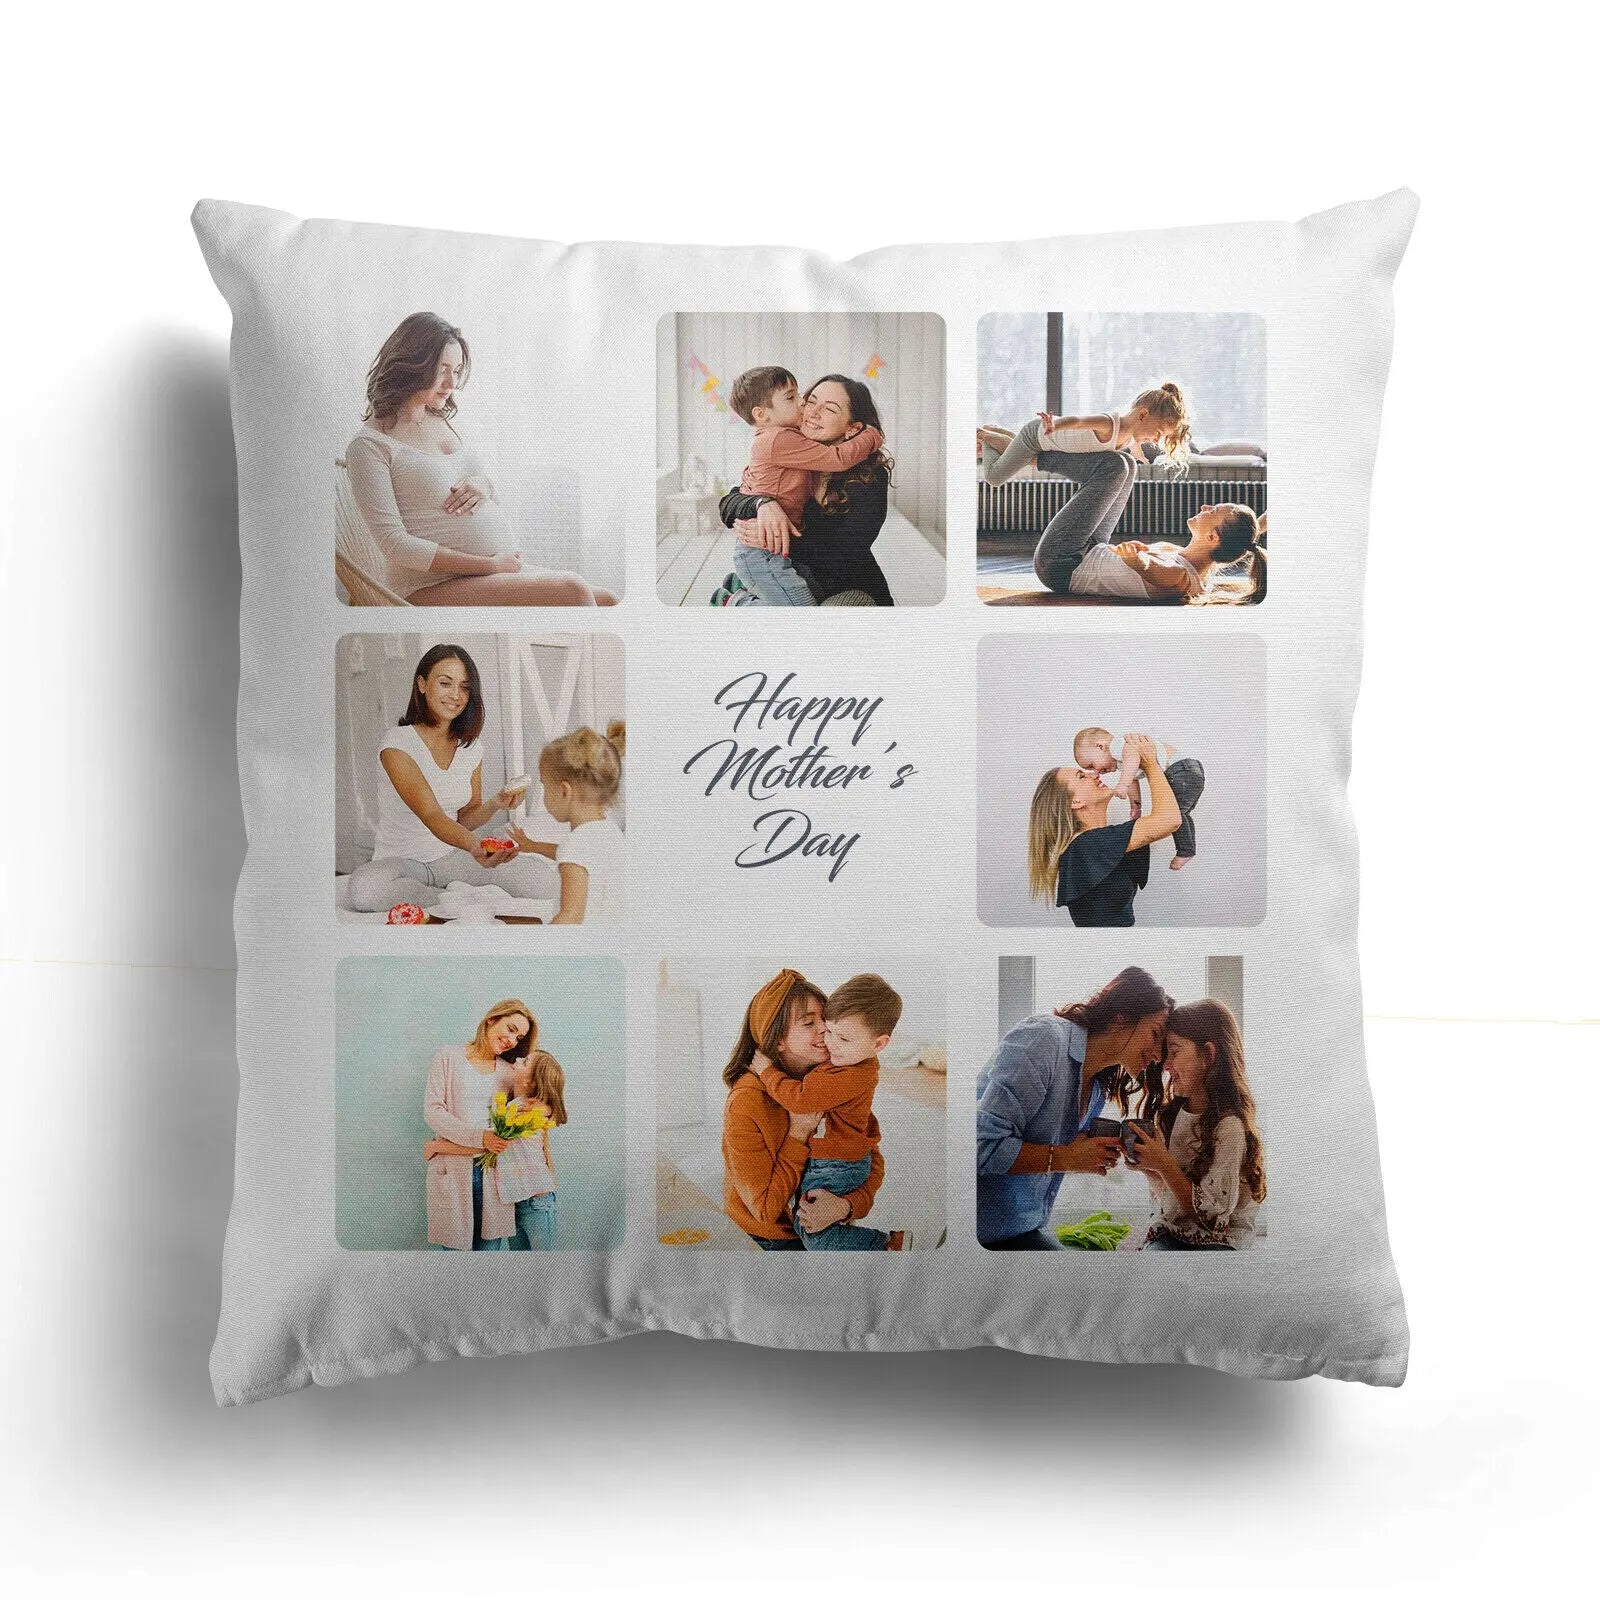 Personalised Cushion Case & Custom Message Perfect Gift for Mothers, or Fathers Day - CushionPop